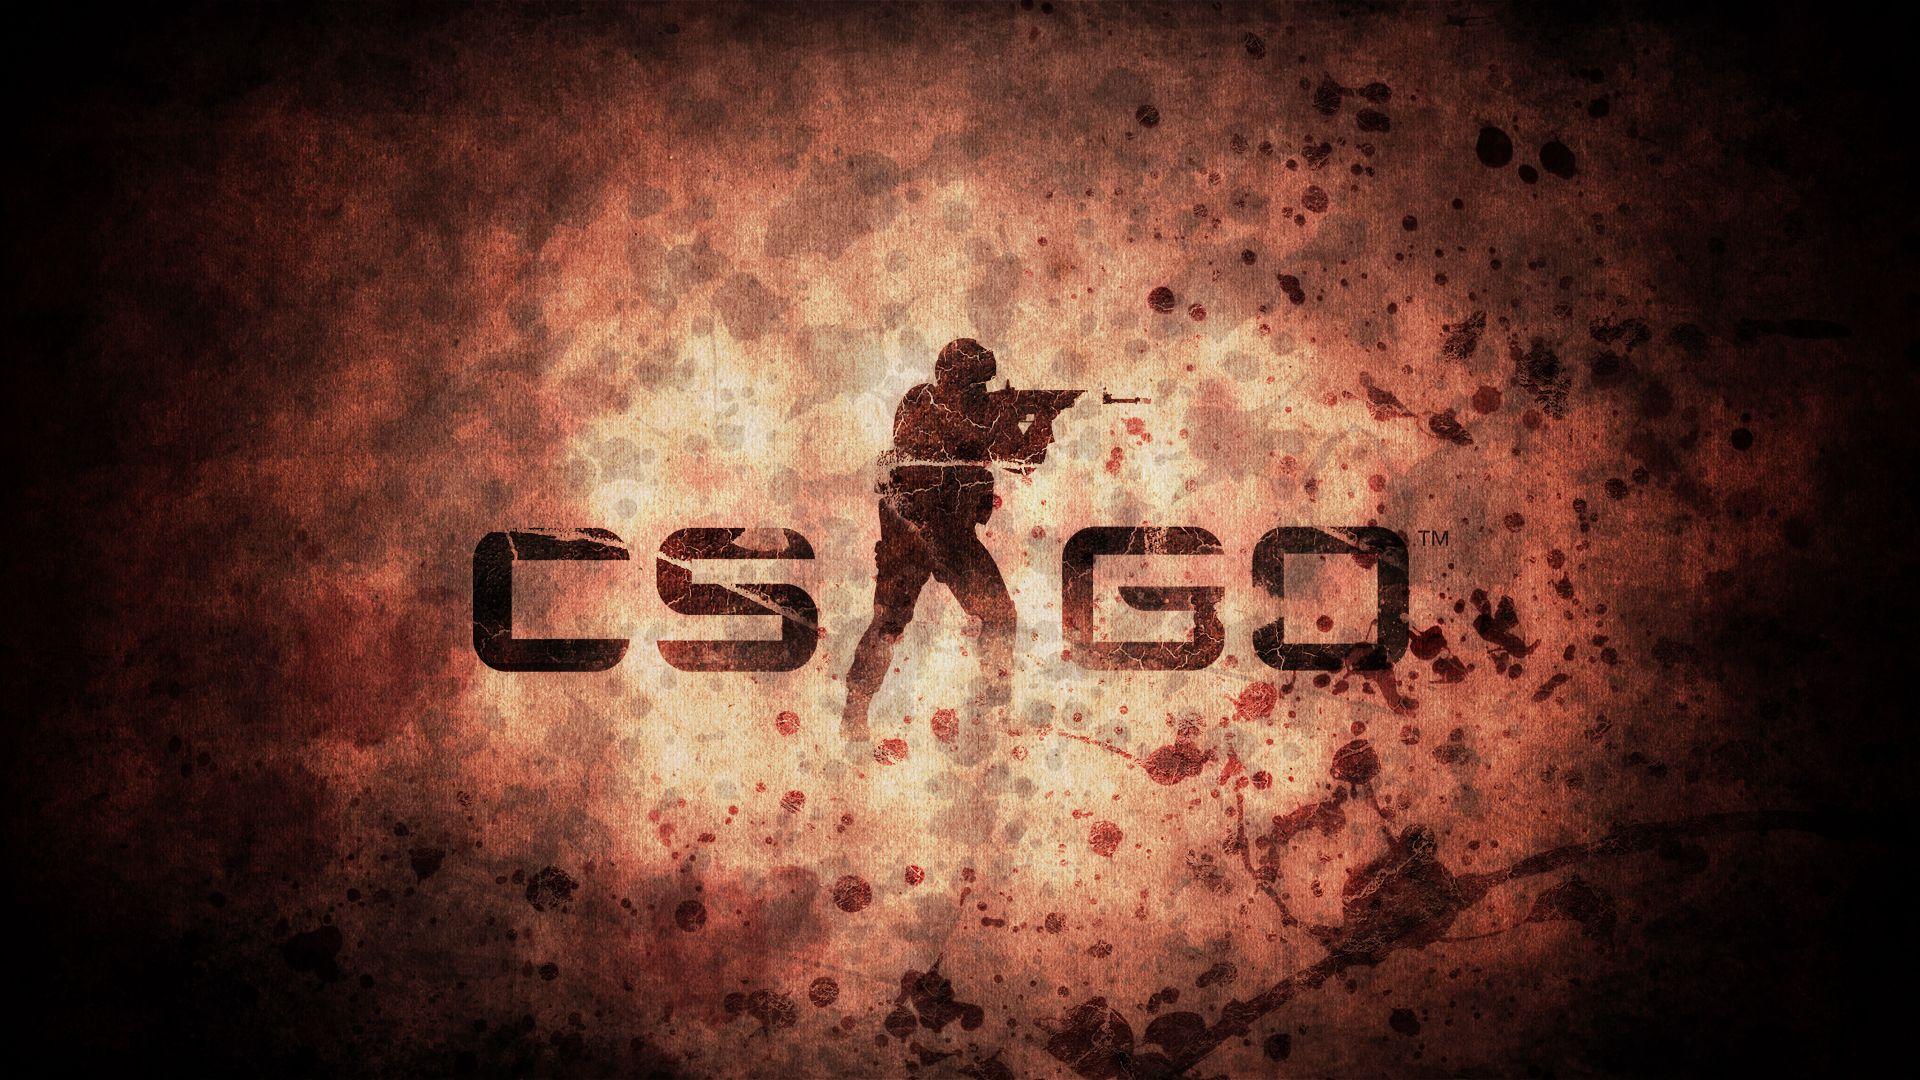 New Counter Strike Global Offensive Wallpaper, Counter Strike